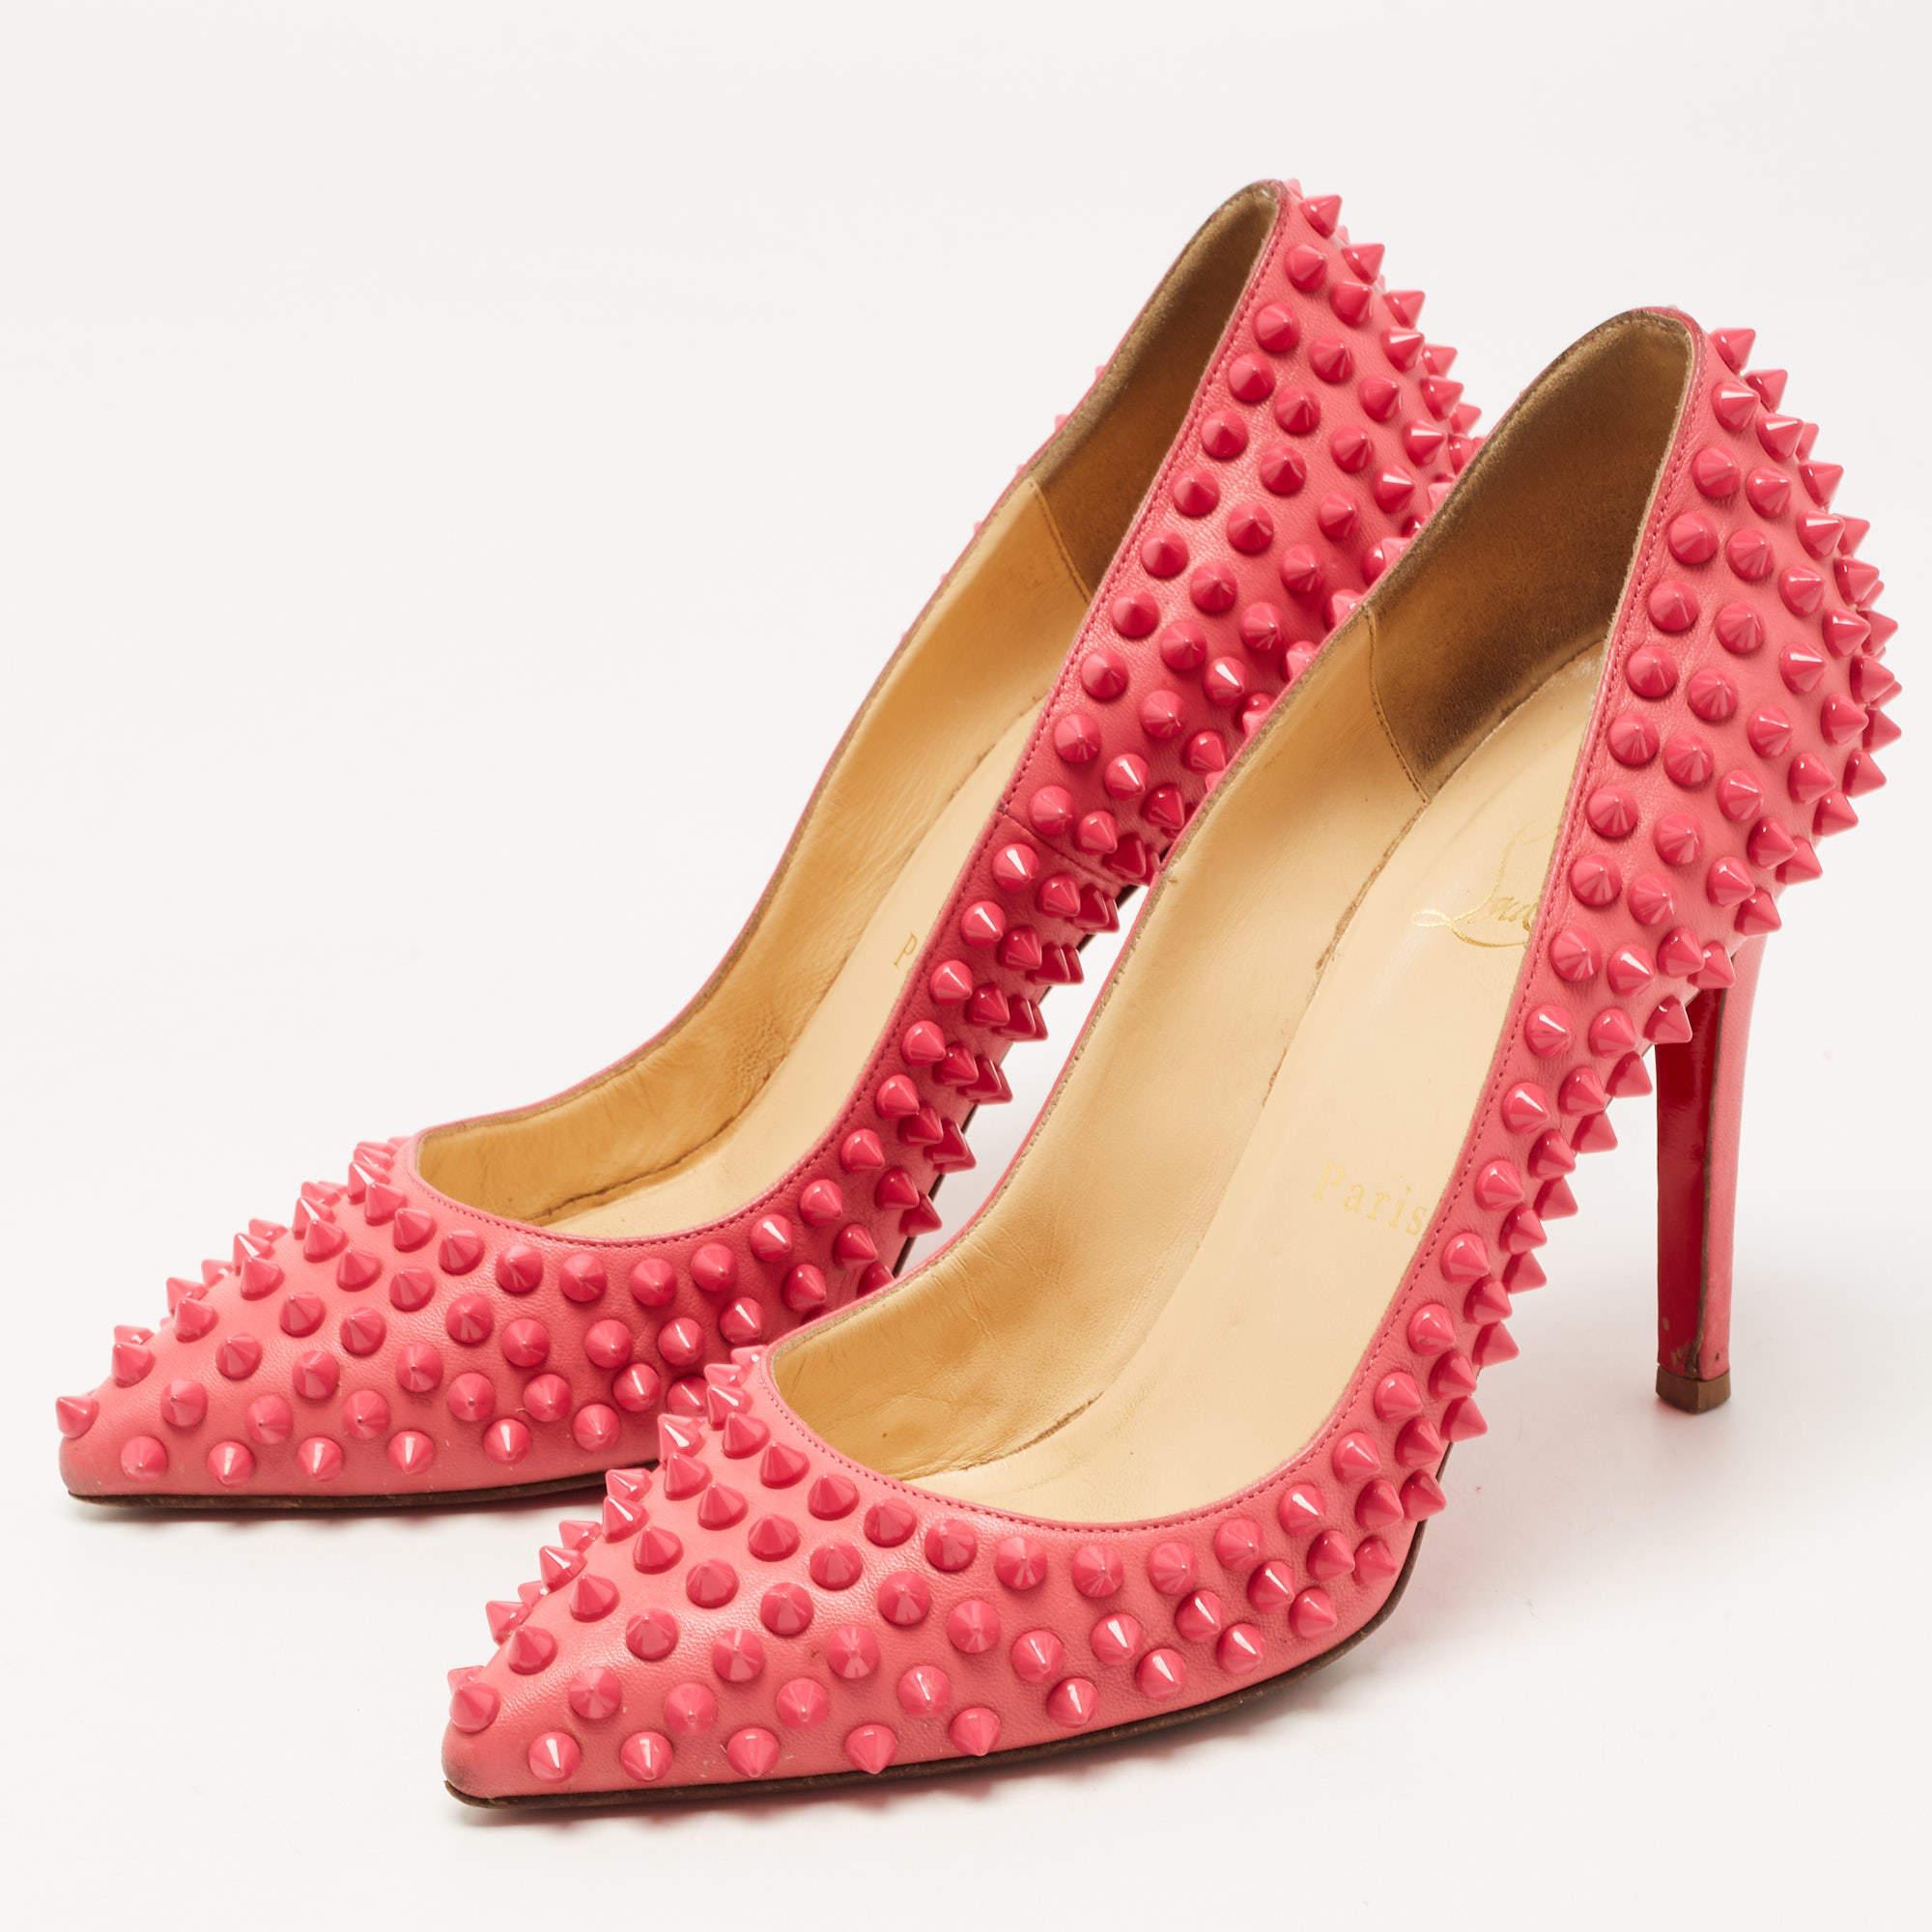 Christian Louboutin Pink Leather Pigalle Spikes Pumps Size 37 2